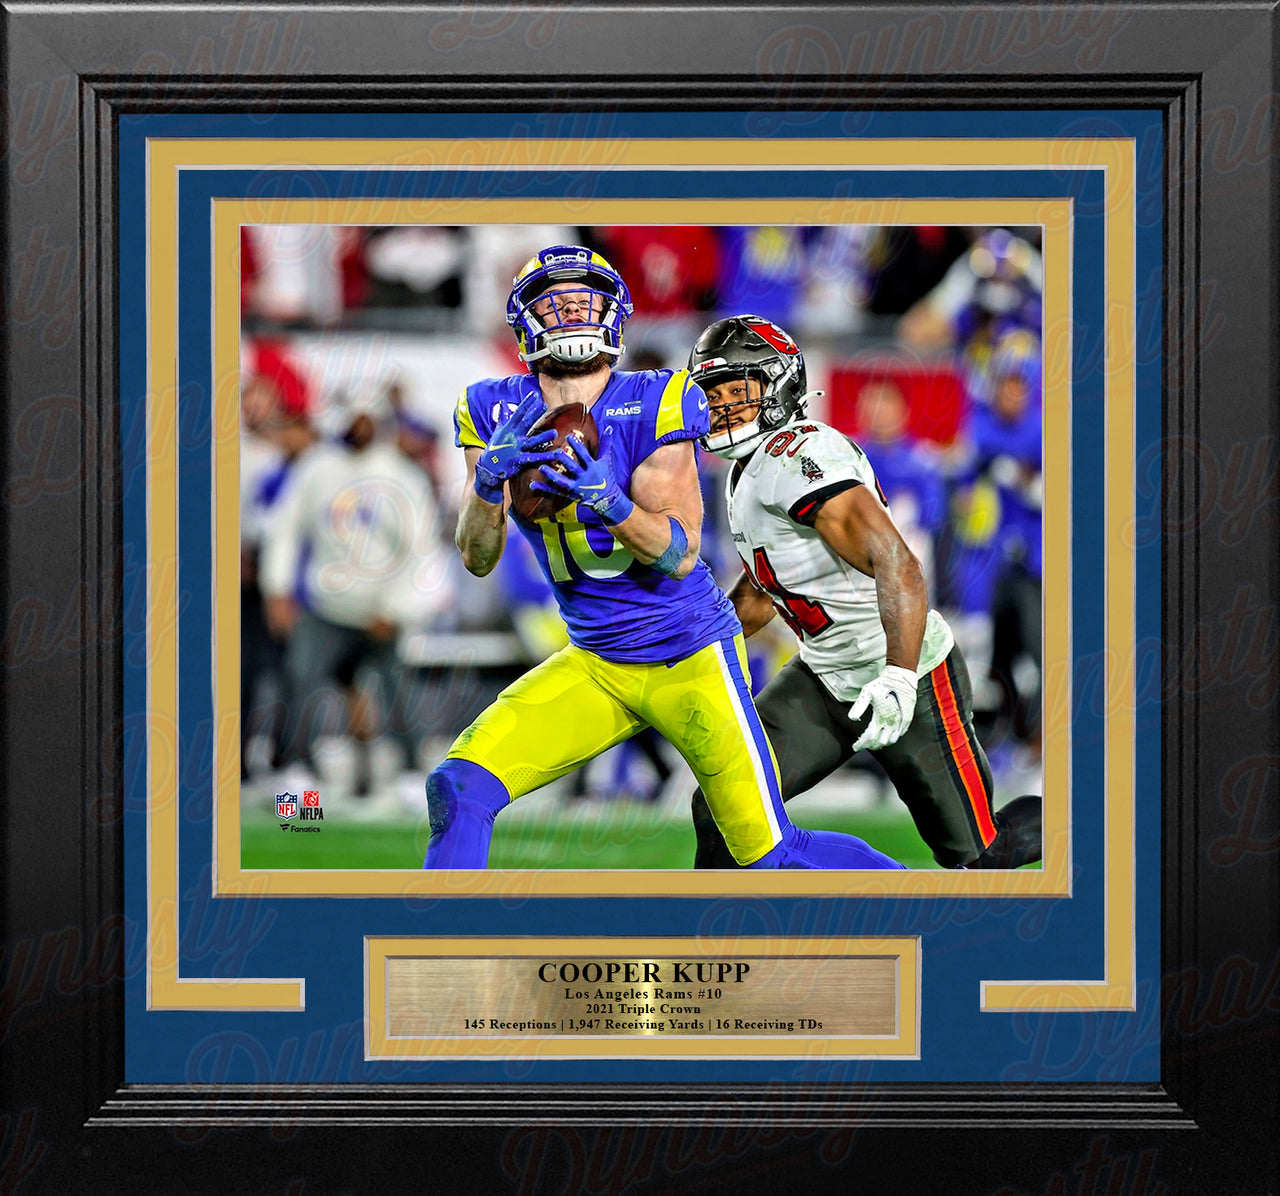 Cooper Kupp Playoff Action Los Angeles Rams 8" x 10" Framed Football Photo - Dynasty Sports & Framing 